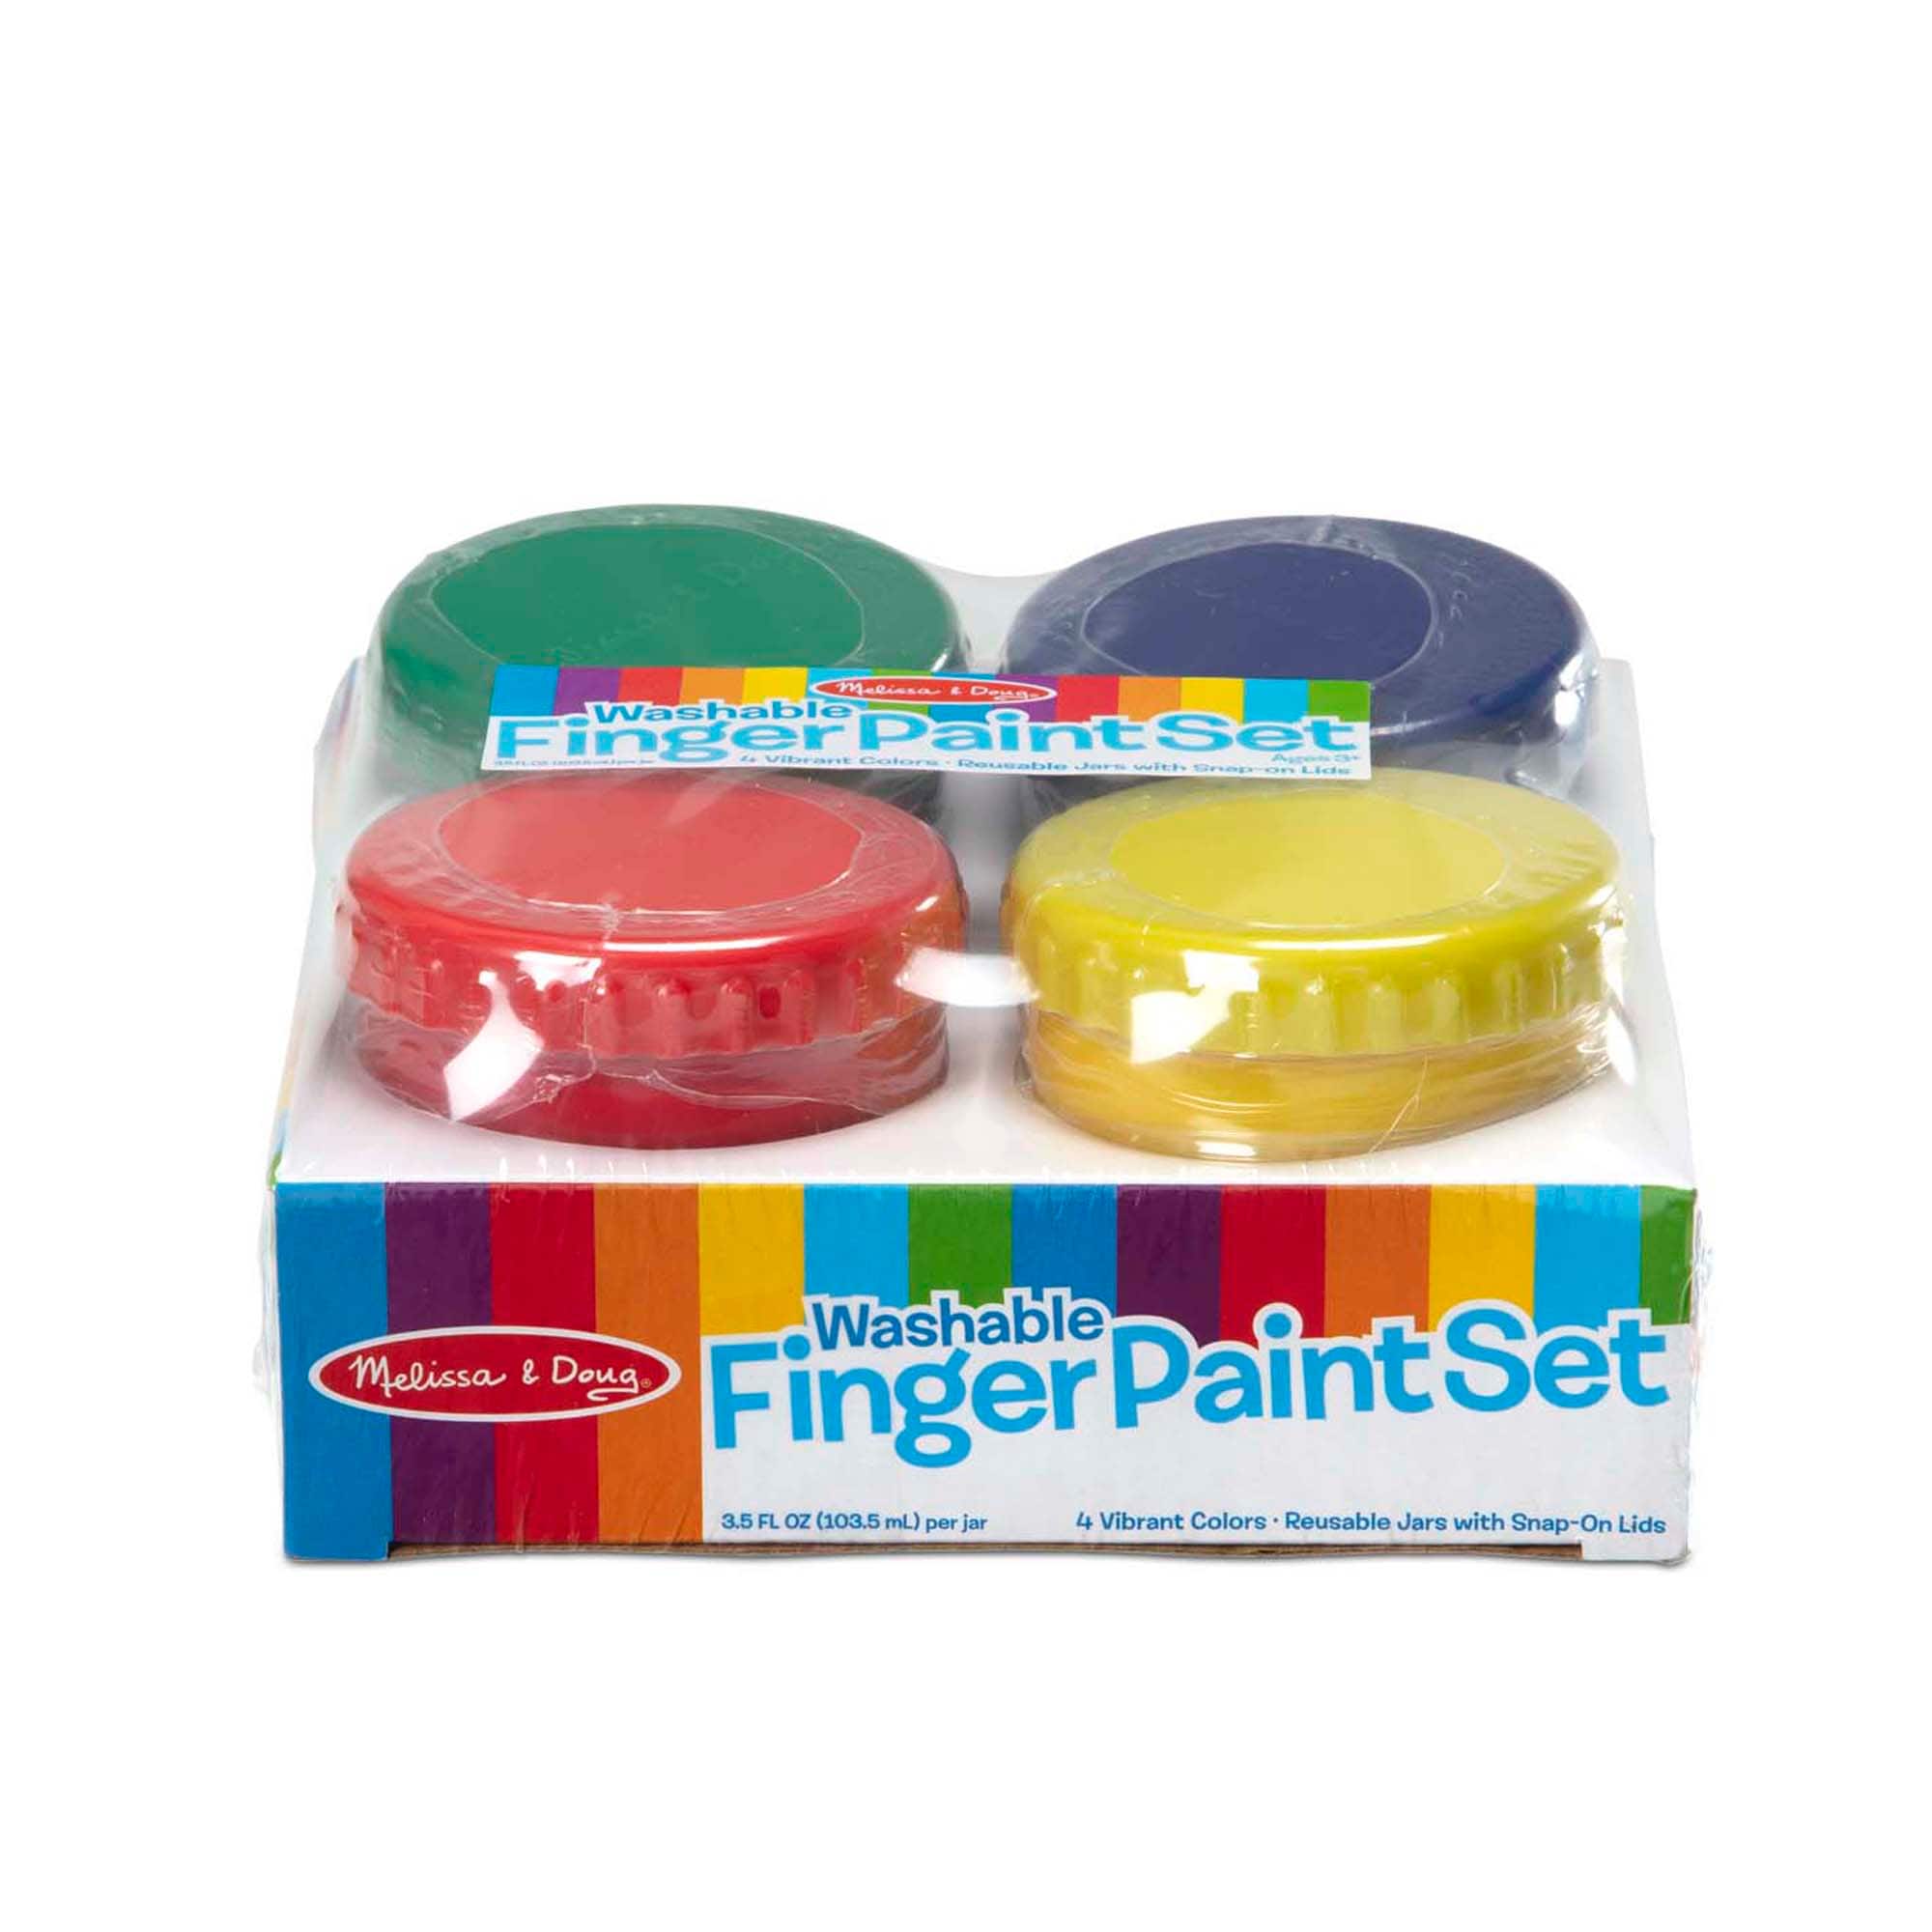 Melissa Doug Finger Paint Paper Pad 12 x 18 Inches 50 Sheets 2-Pack